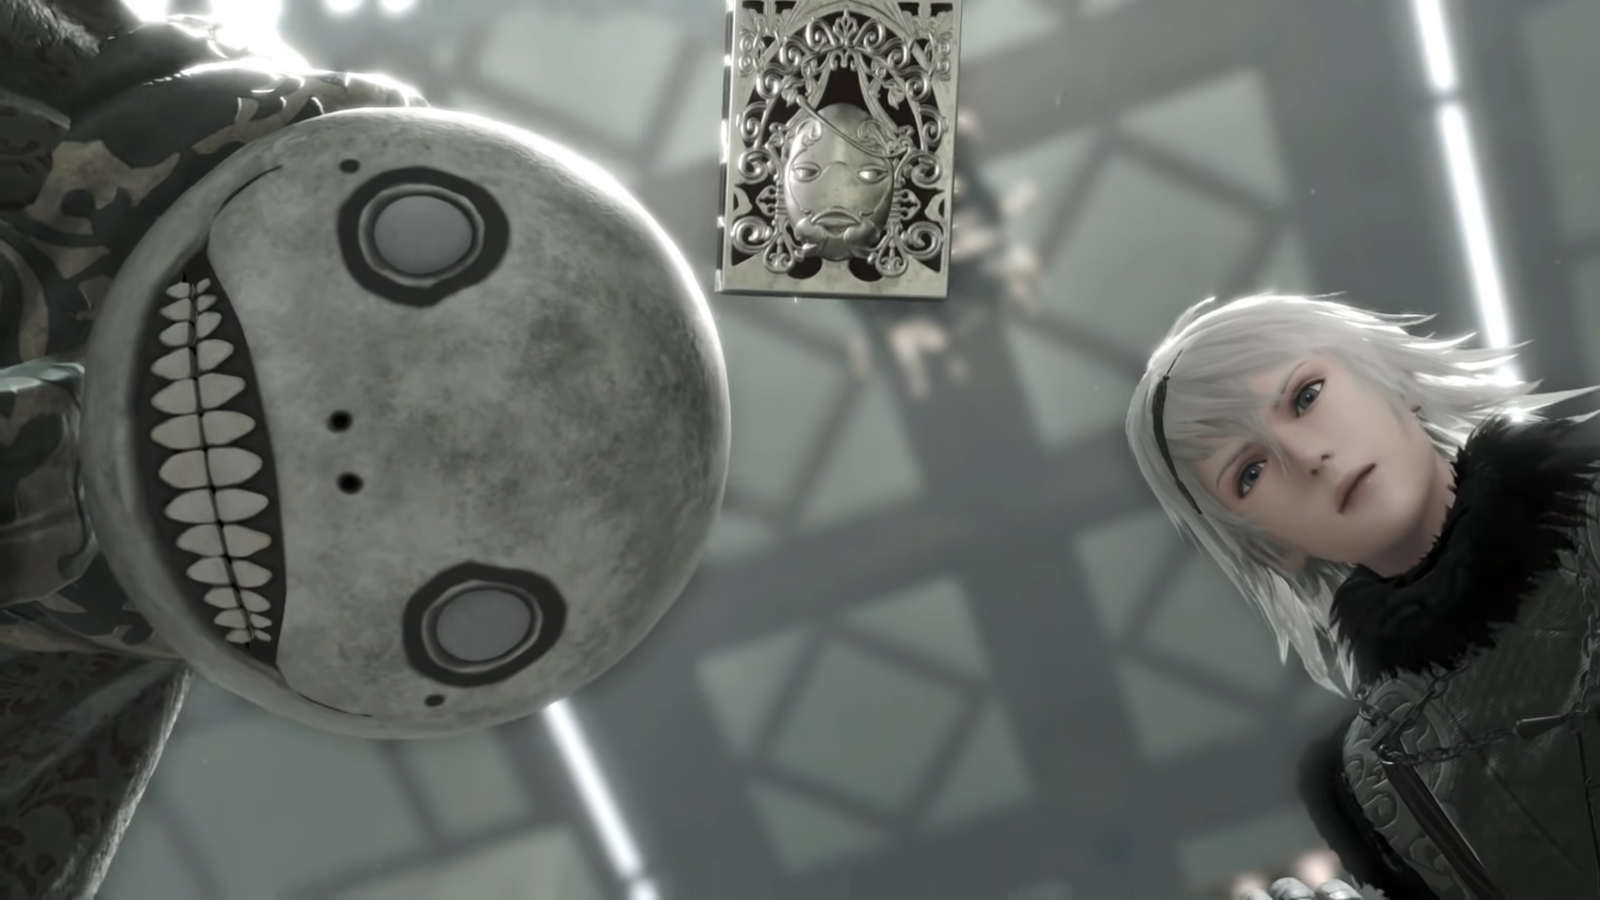 Nier Automata Ver 1.1a Returns with New Episodes in July